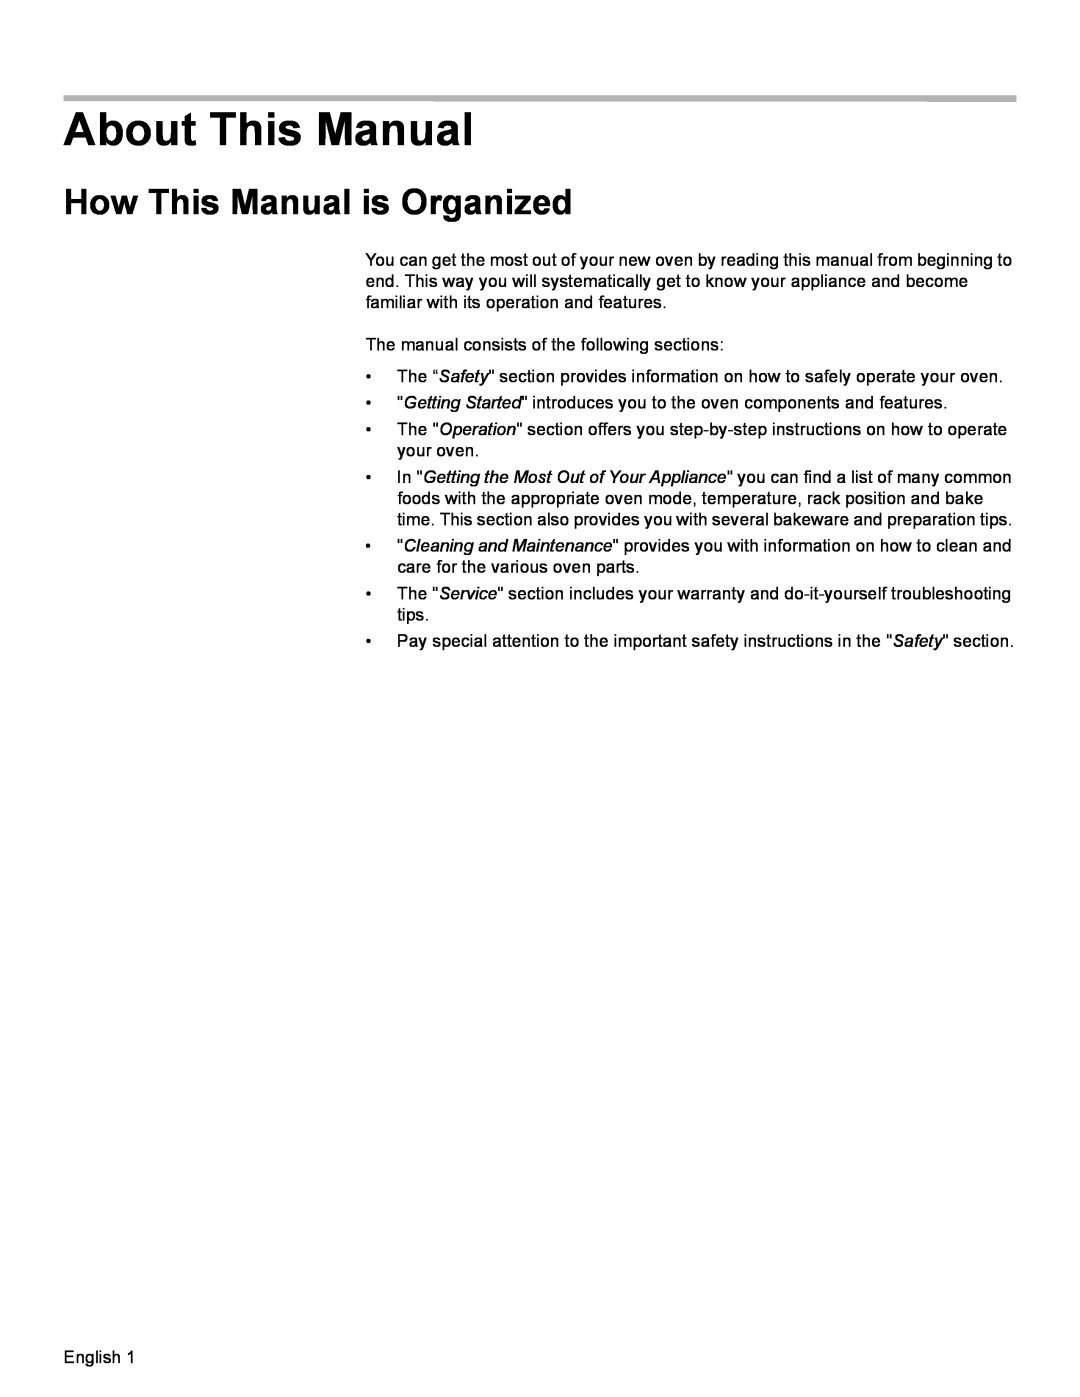 Bosch Appliances HBL57, HBL56, HBN56, HBN54 manual About This Manual, How This Manual is Organized 